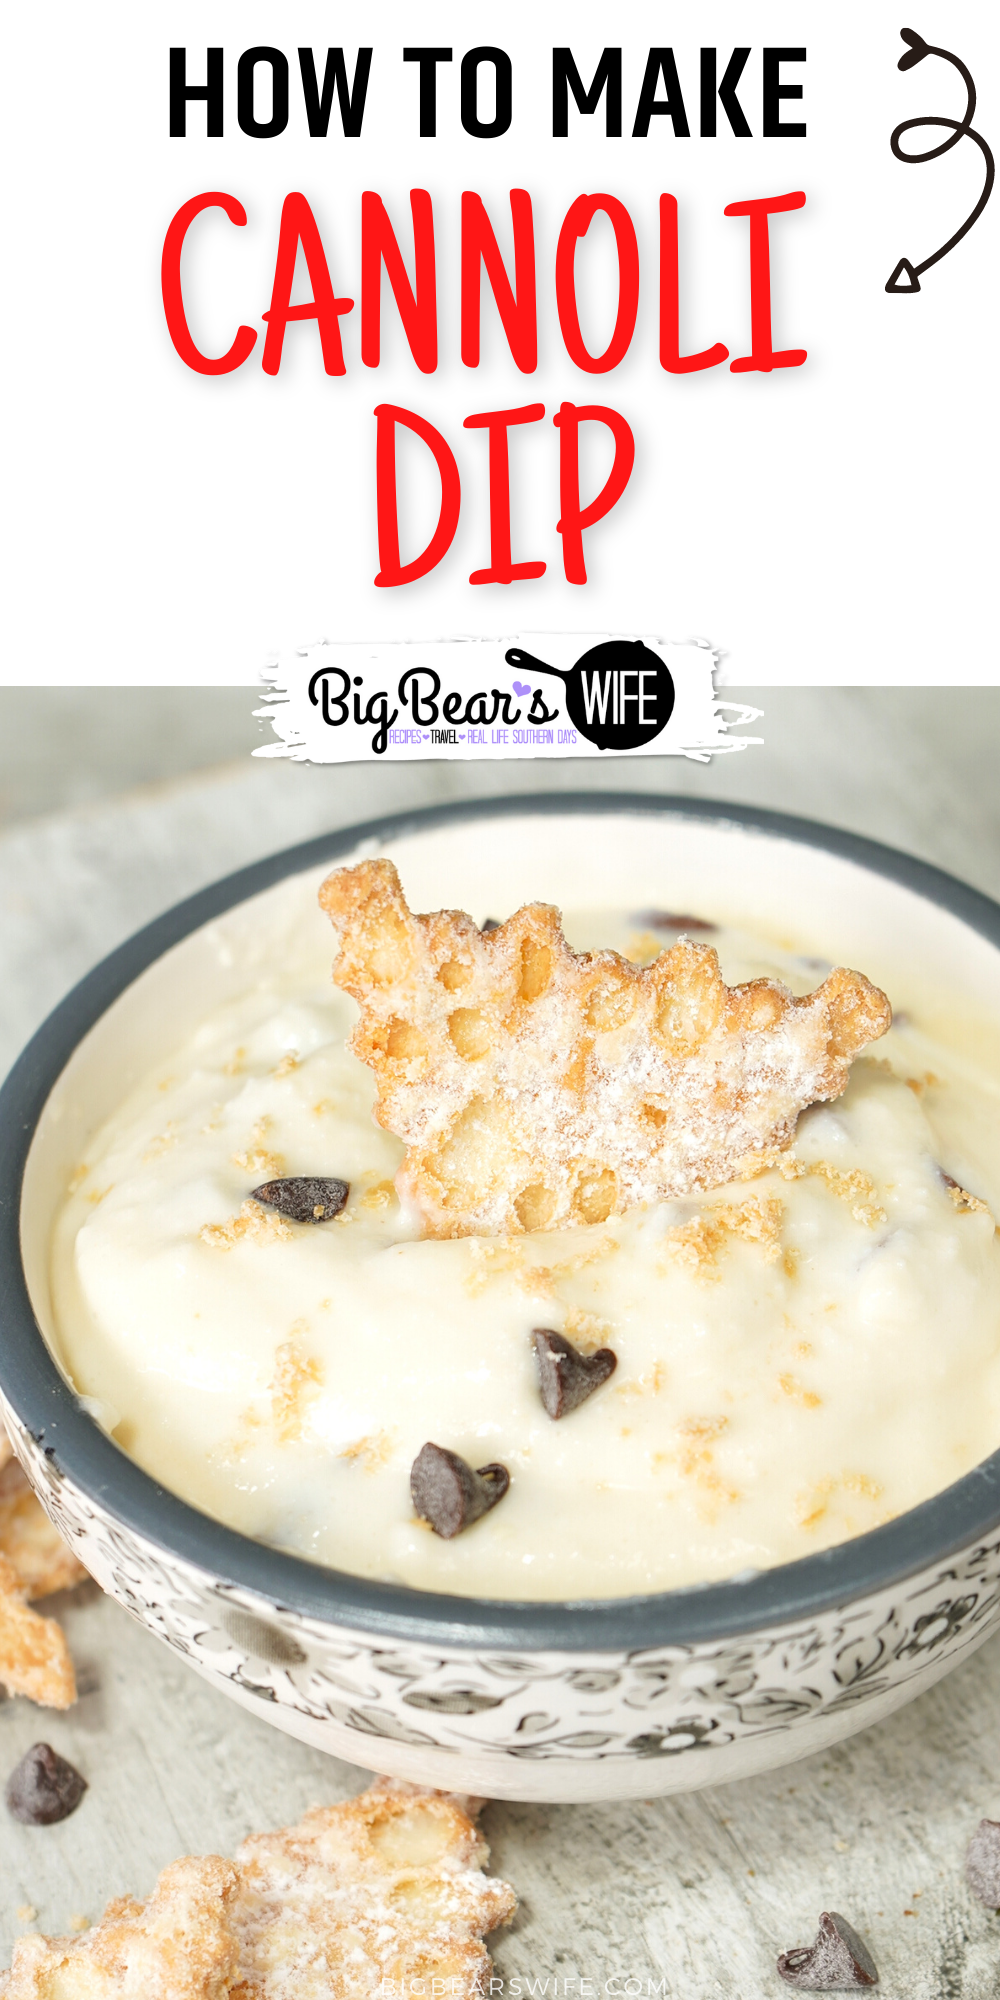 This Cannoli Dip is perfect for parties or holidays! Taste like a Cannoli without a lot of work! Super easy and tasty!  via @bigbearswife